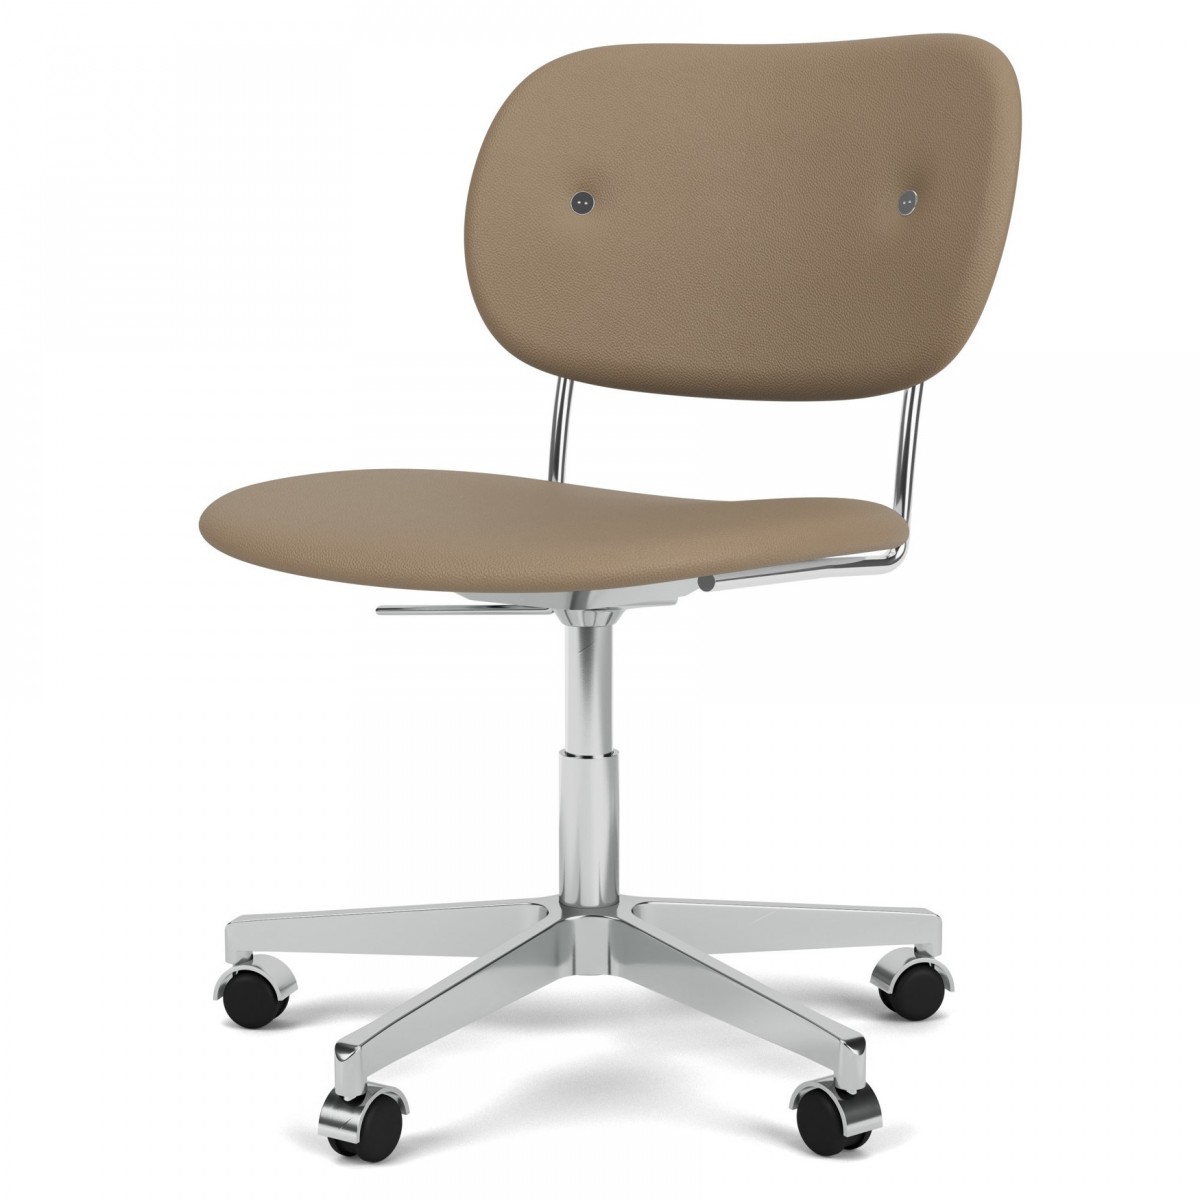 Co Task Chair, Star Base with Casters, Upholstered Seat and Back